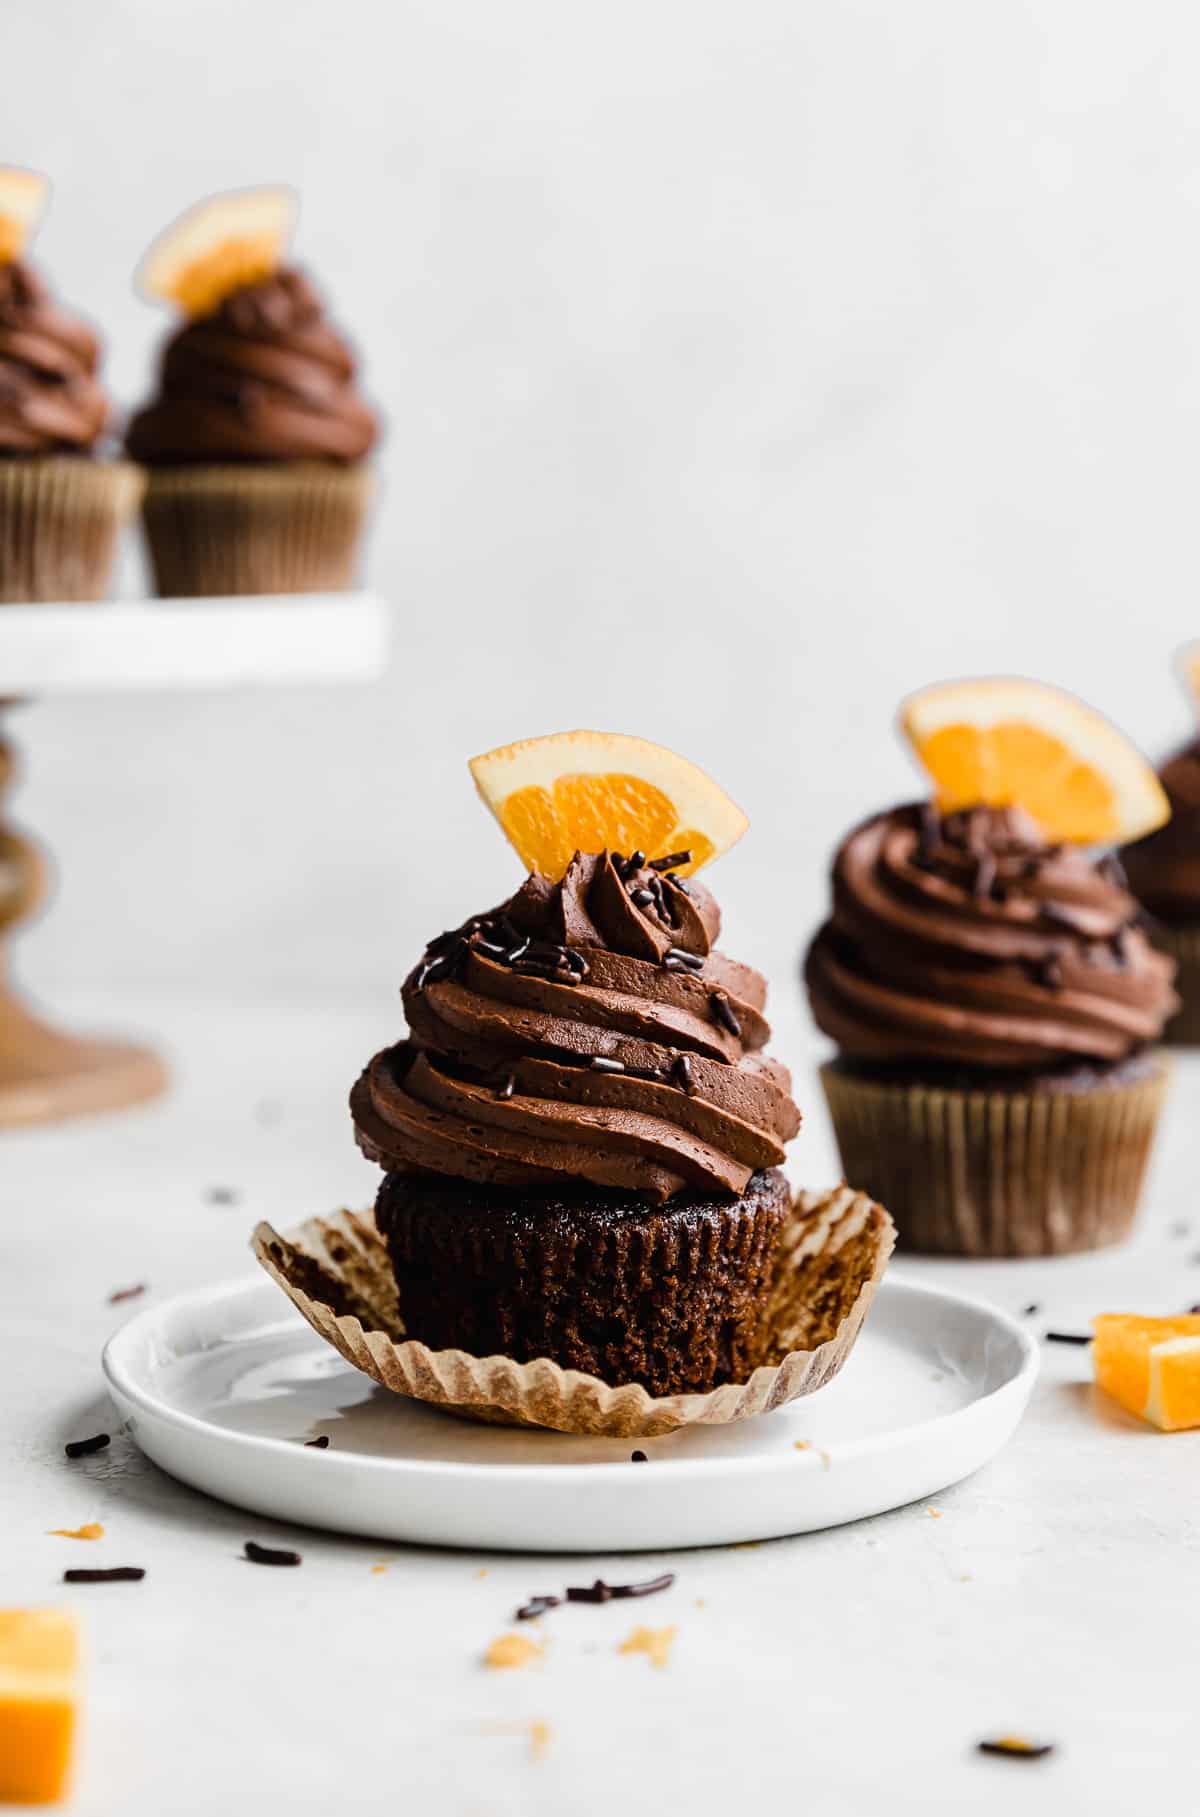 Chocolate frosting topped Chocolate Orange Cupcakes with a fresh orange slice stuck into the frosting, on a white background.